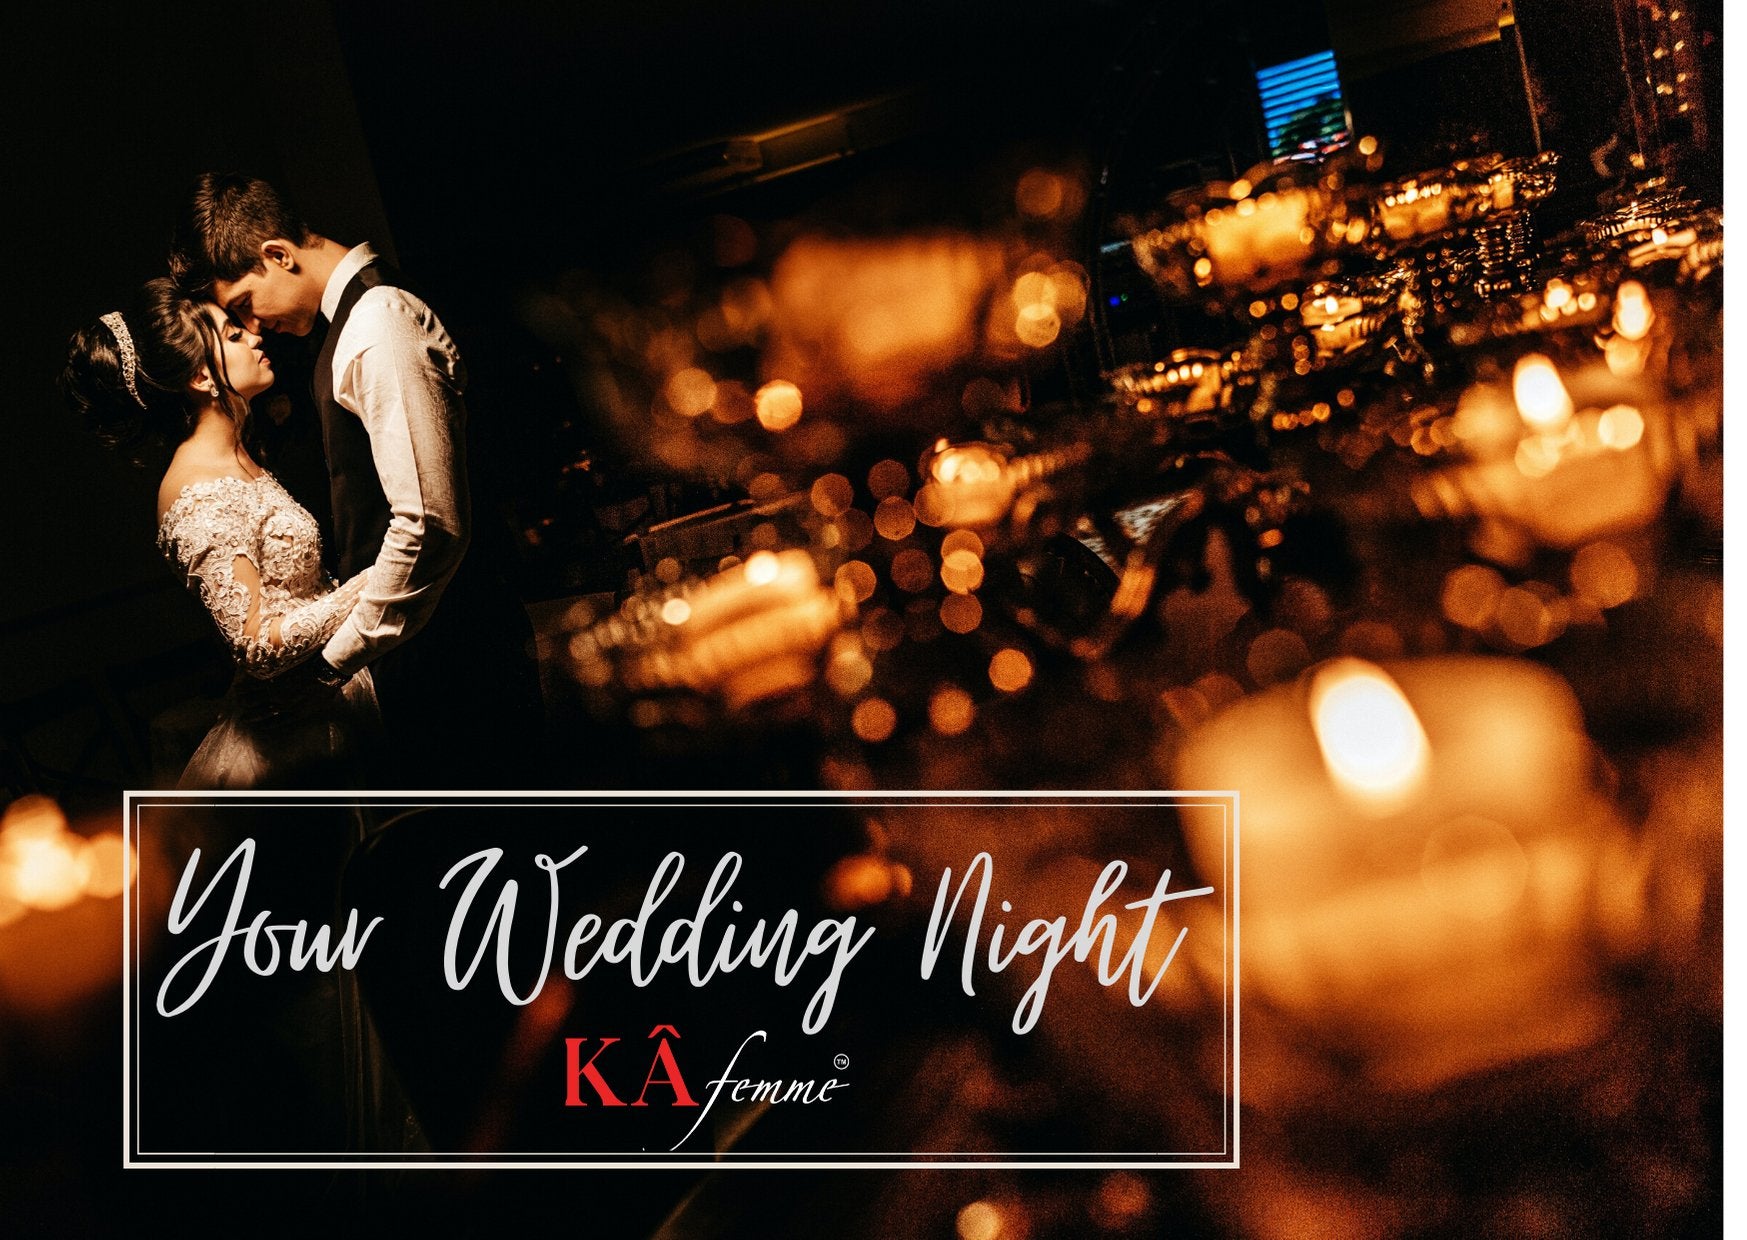 Your Wedding Night – The Gift of New Beginnings - KÂfemme